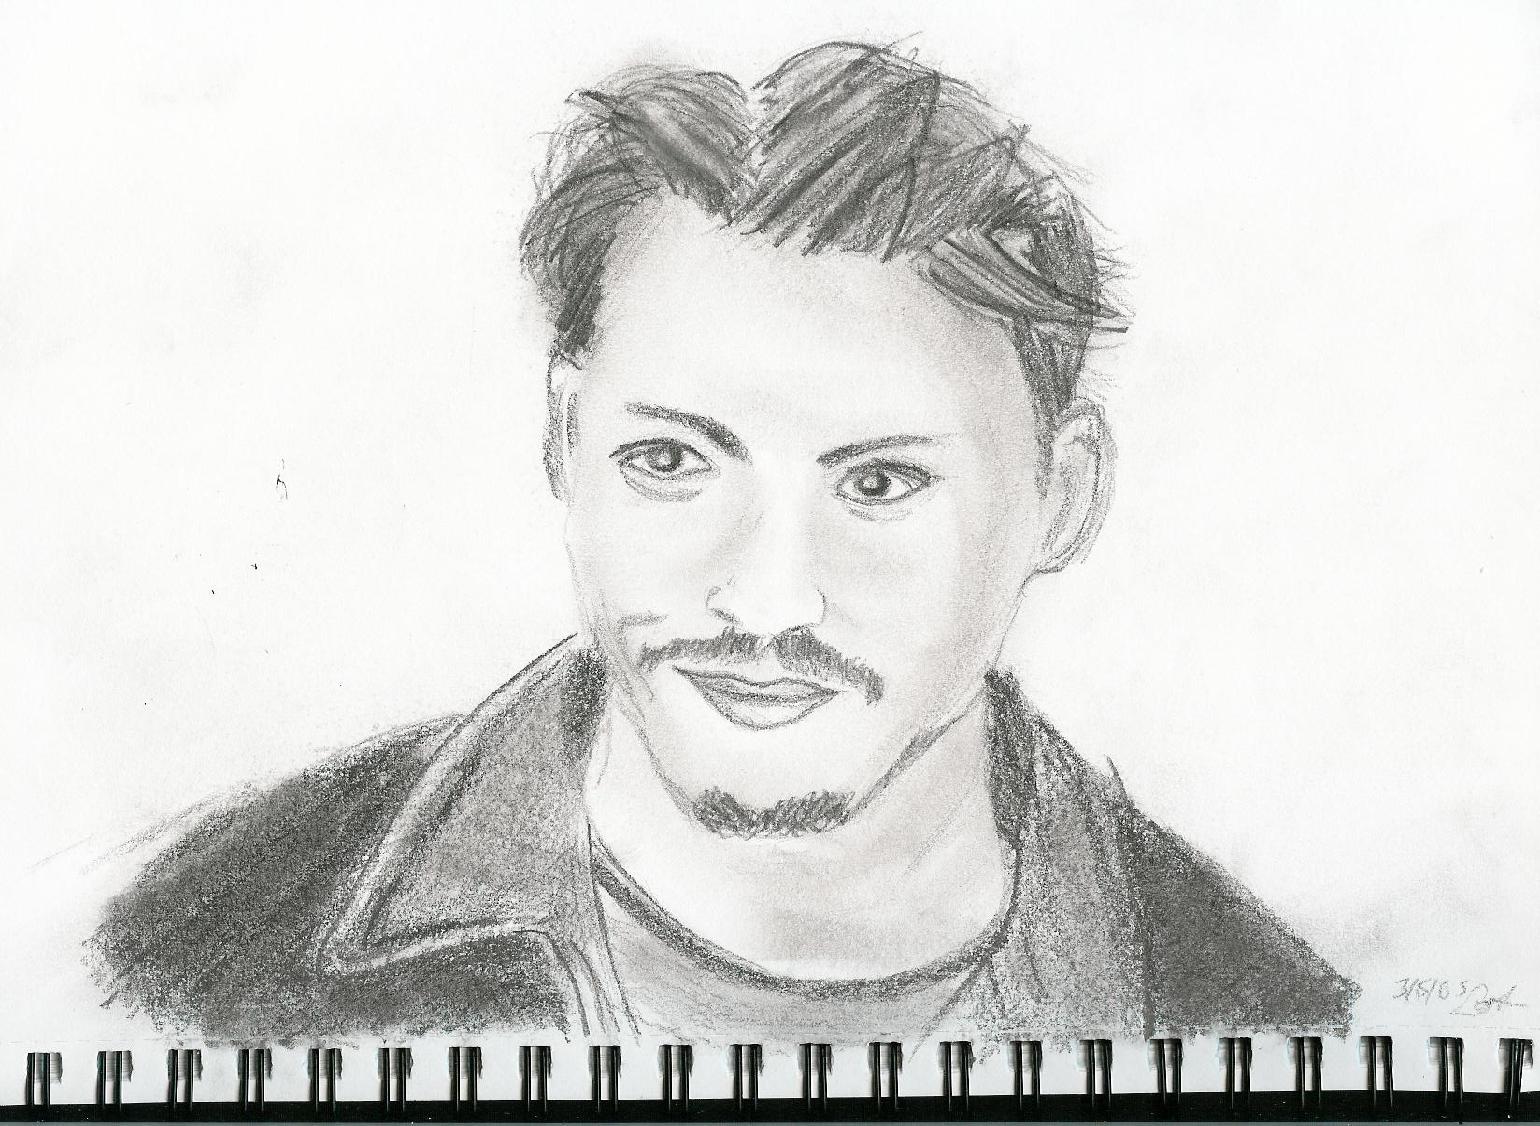 Johnny depp with short hair? by capt_jacklover